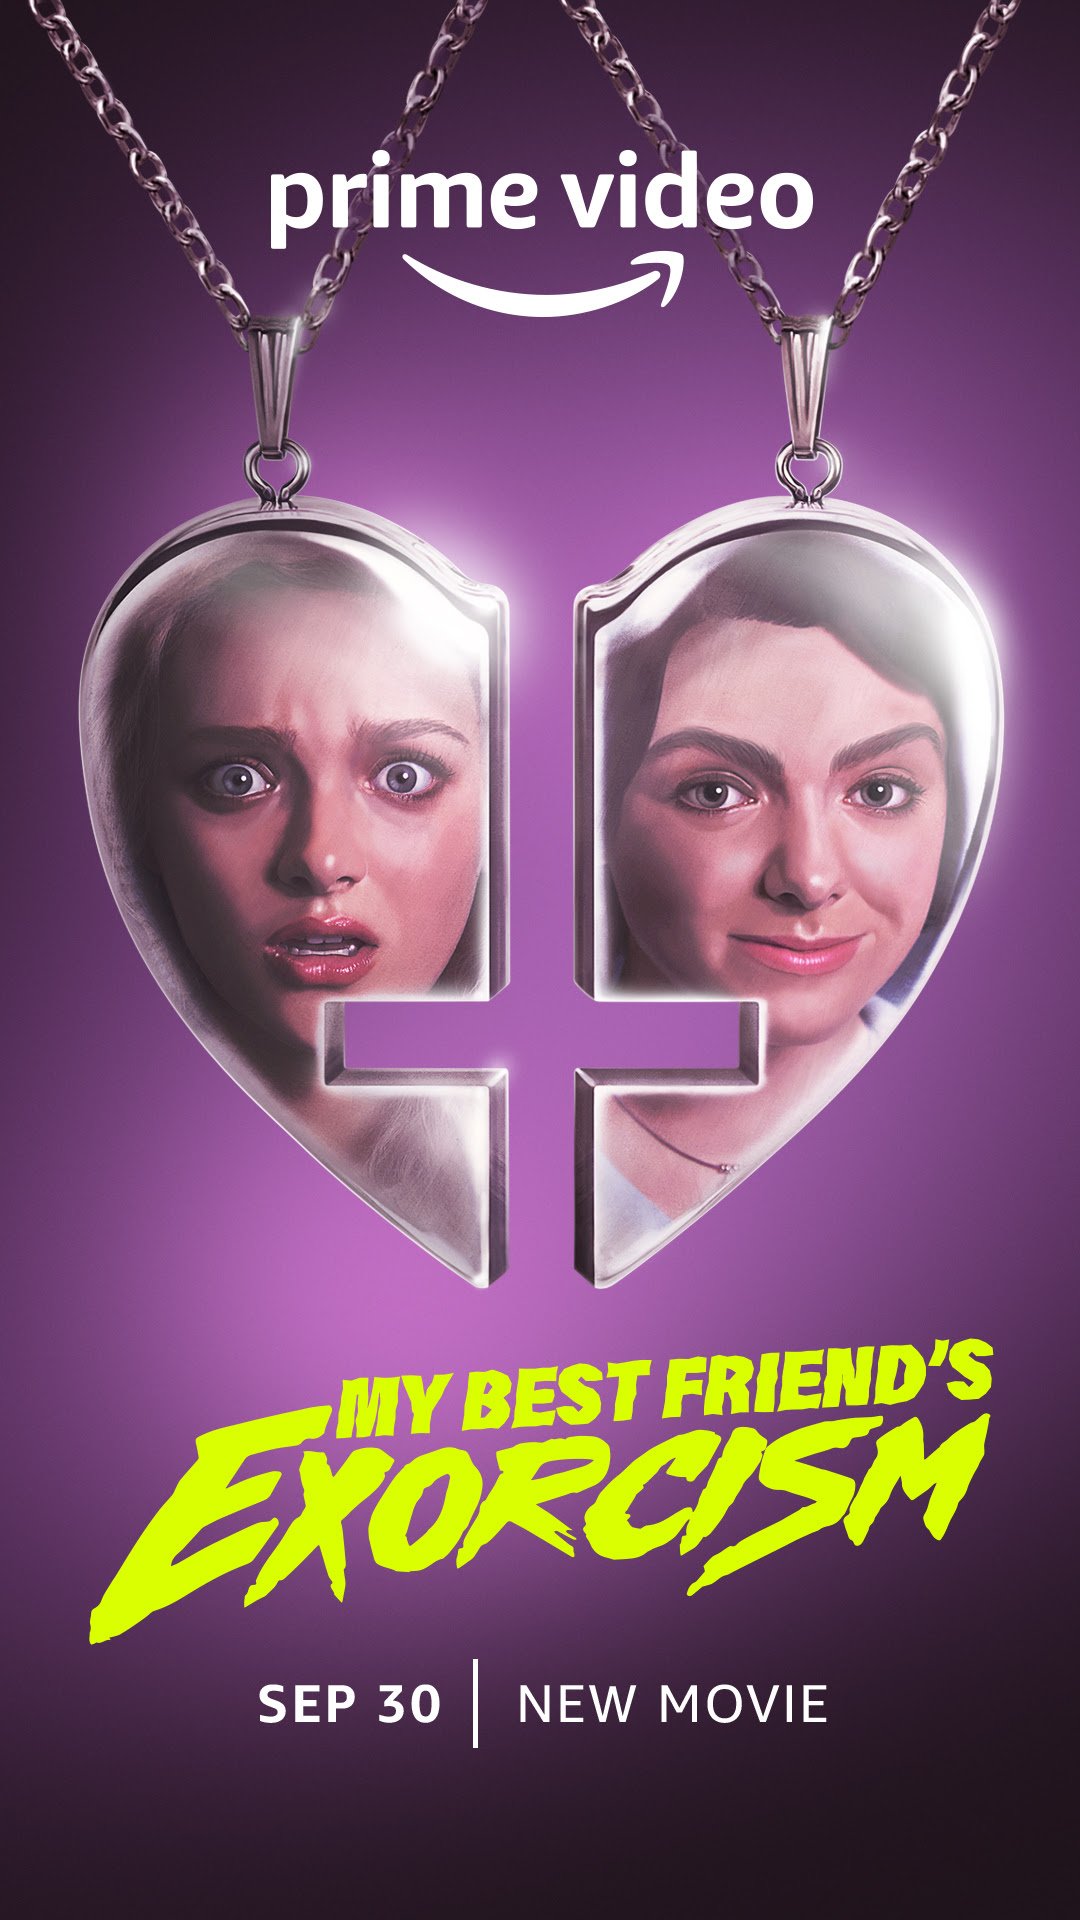 My Best Friend's Exorcism Movie 2022, Official Trailer, Release Date, HD Poster & Cast Name Genre: Comedy, Horror Language: English Director: Damon Thomas Producer: Christopher Landon, Ellen Goldsmith-Vein, Jennifer Semler Writer: Jenna Lamia Release date: 30 September 2022 Cast Name: Elsie Fisher, Amiah Miller, Cathy Ang, Rachel Ogechi Kanu Where to Watch : OTT link  My Best Friend's Exorcism Movie 2022, Official Trailer, Release Date High school sophomores, Abby (Elsie Fisher) and Gretchen (Amiah Miller), have been best friends since fourth grade. Suddenly, Gretchen begins to act different after an evening goes disastrously wrong. Gretchen becomes moody and irritable, and whenever she's nearby, bizarre incidents keep happening. Abby starts to investigate the matter, which leads her to some startling discoveries followed by a terrifying conclusion.